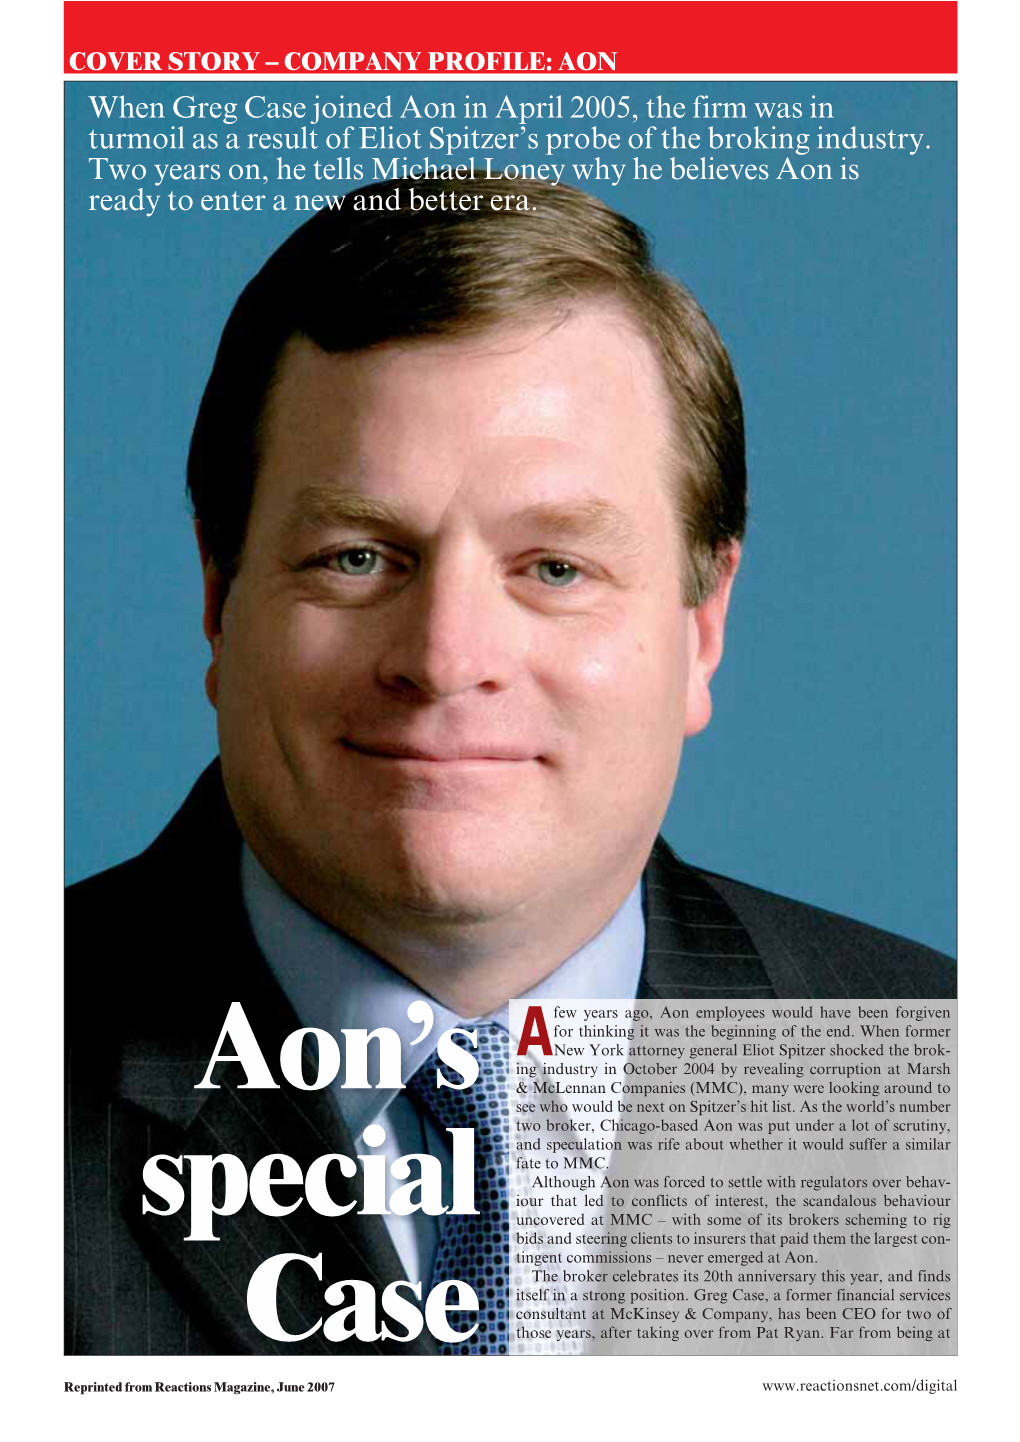 When Greg Case Joined Aon in April 2005, the Firm Was in Turmoil As a Result of Eliot Spitzer’S Probe of the Broking Industry